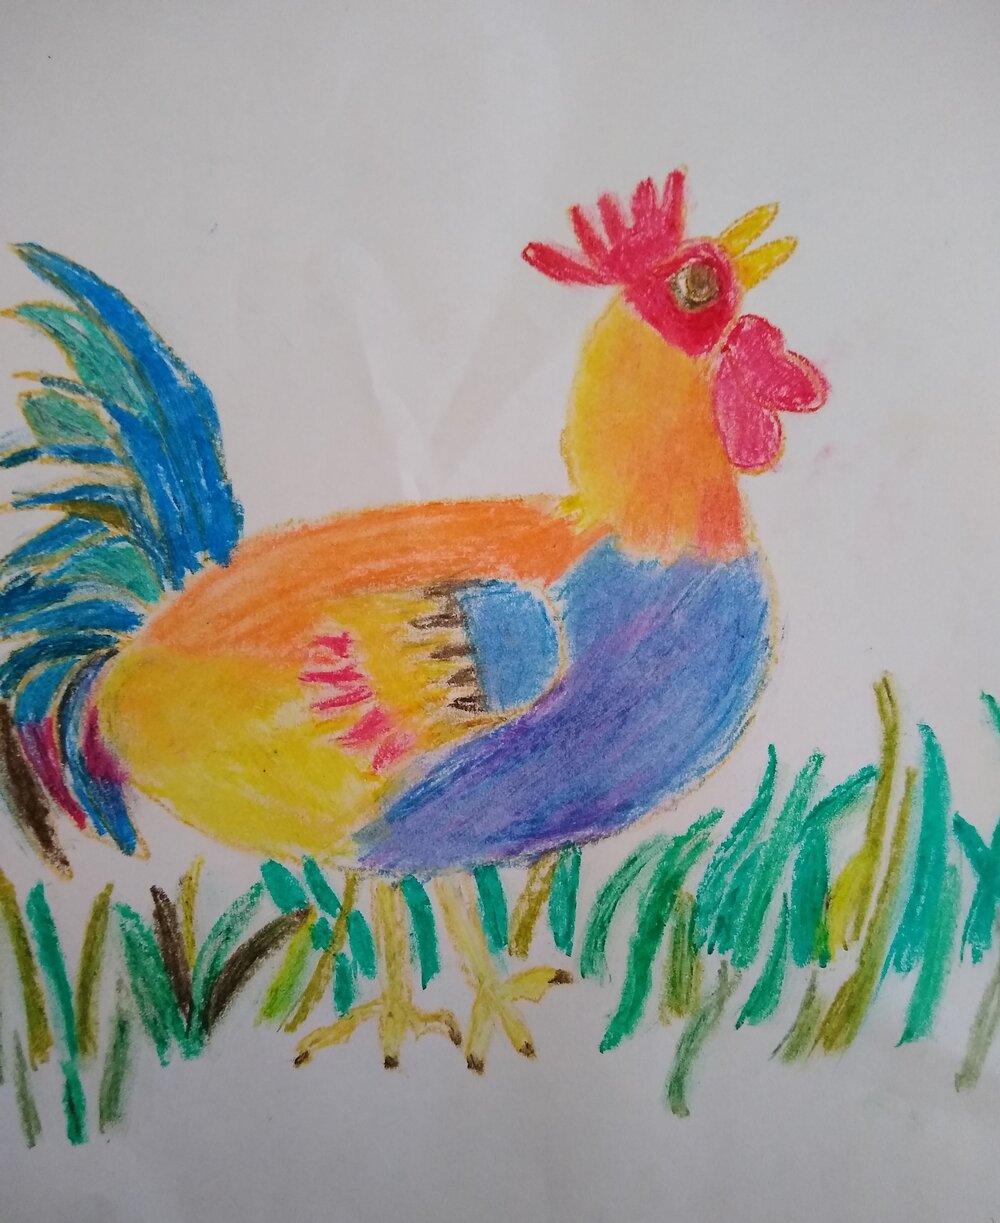 R is for Rooster, by Katelyn